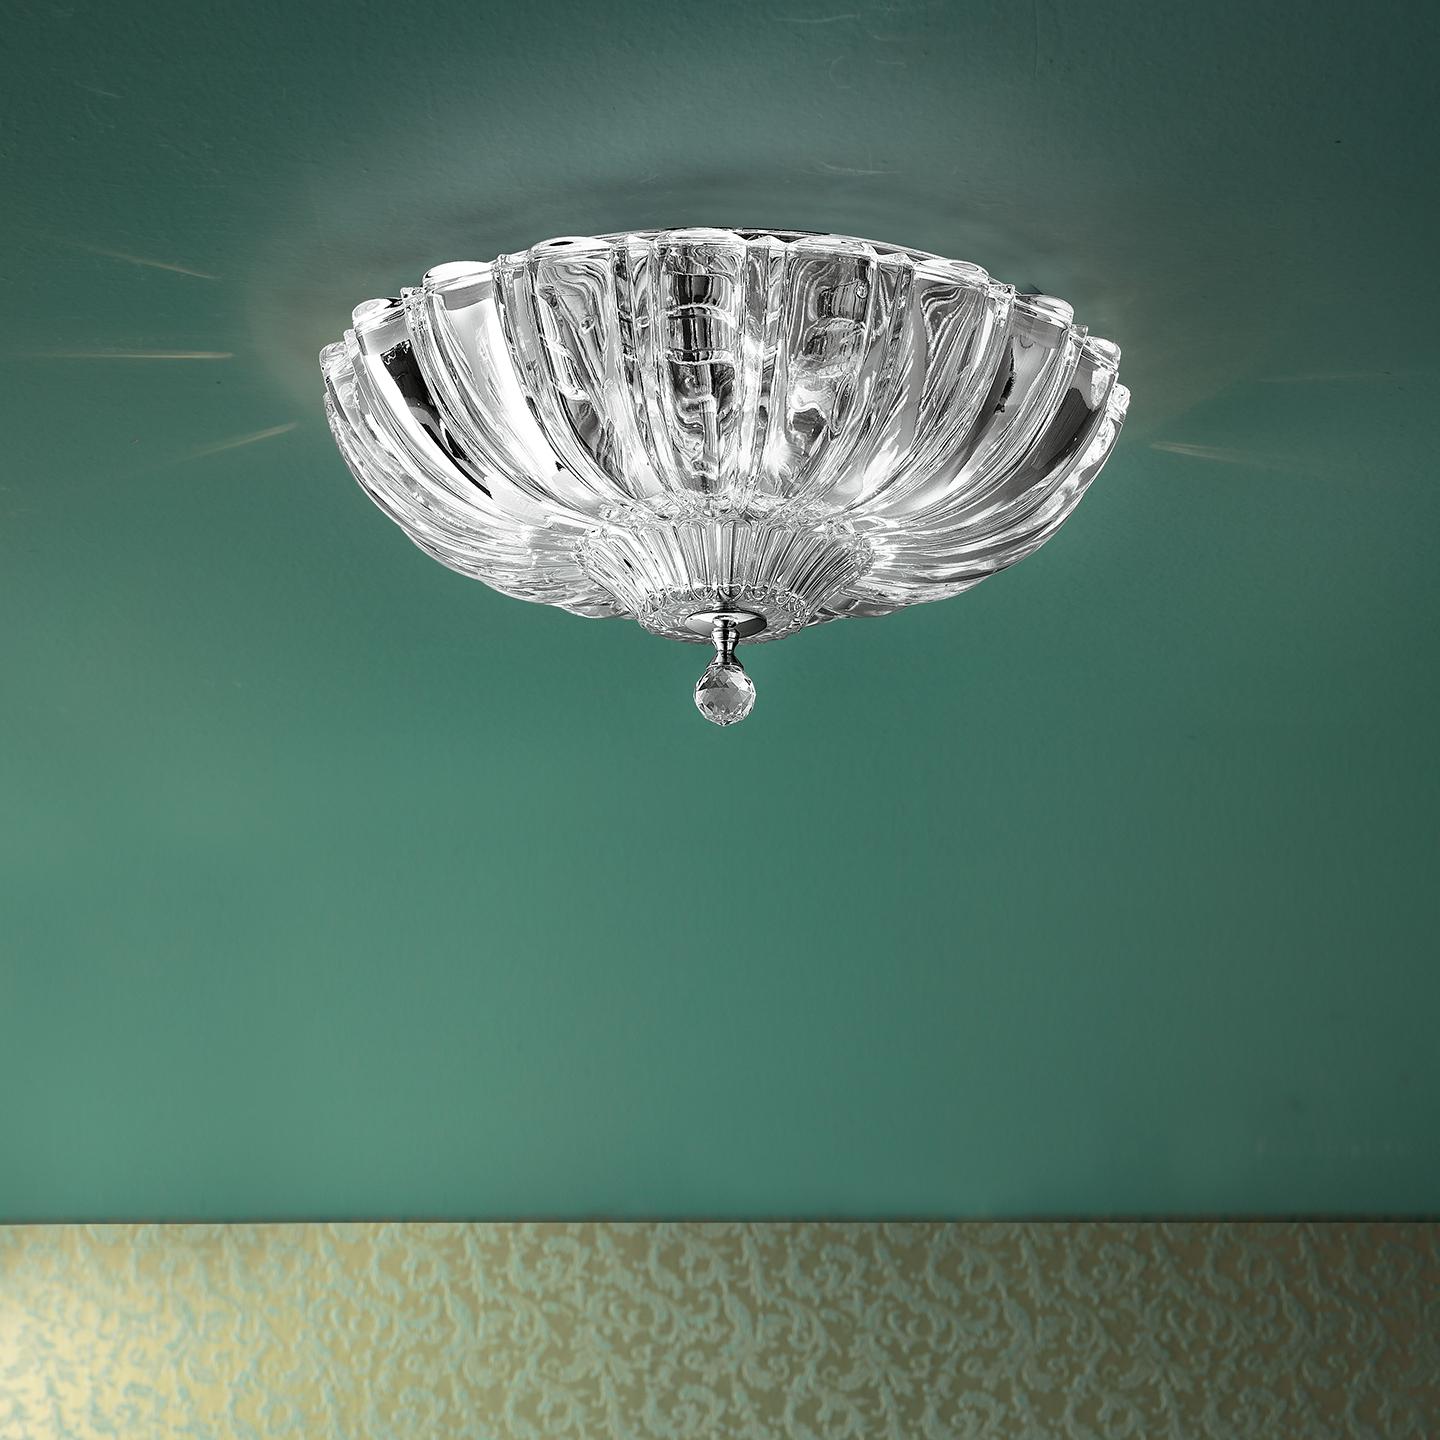 Italian Leucos Pascale PL Ceiling Light in Crystal and Polished Steel by Design Lab